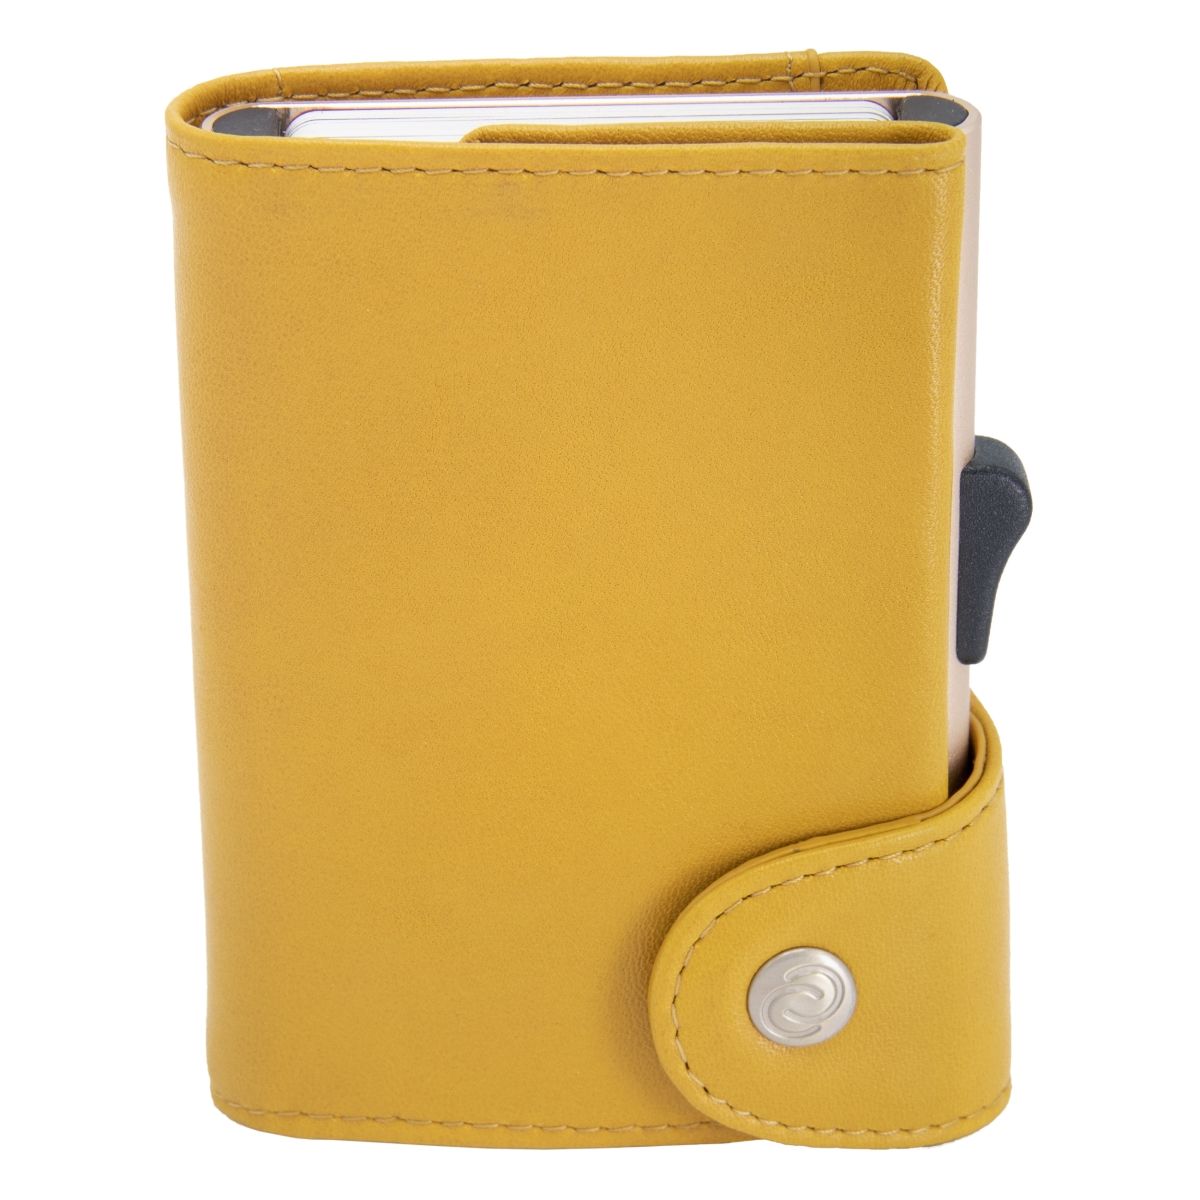 C-Secure XL Aluminum Wallet with Genuine Leather and Coins Pocket - Solis Yellow